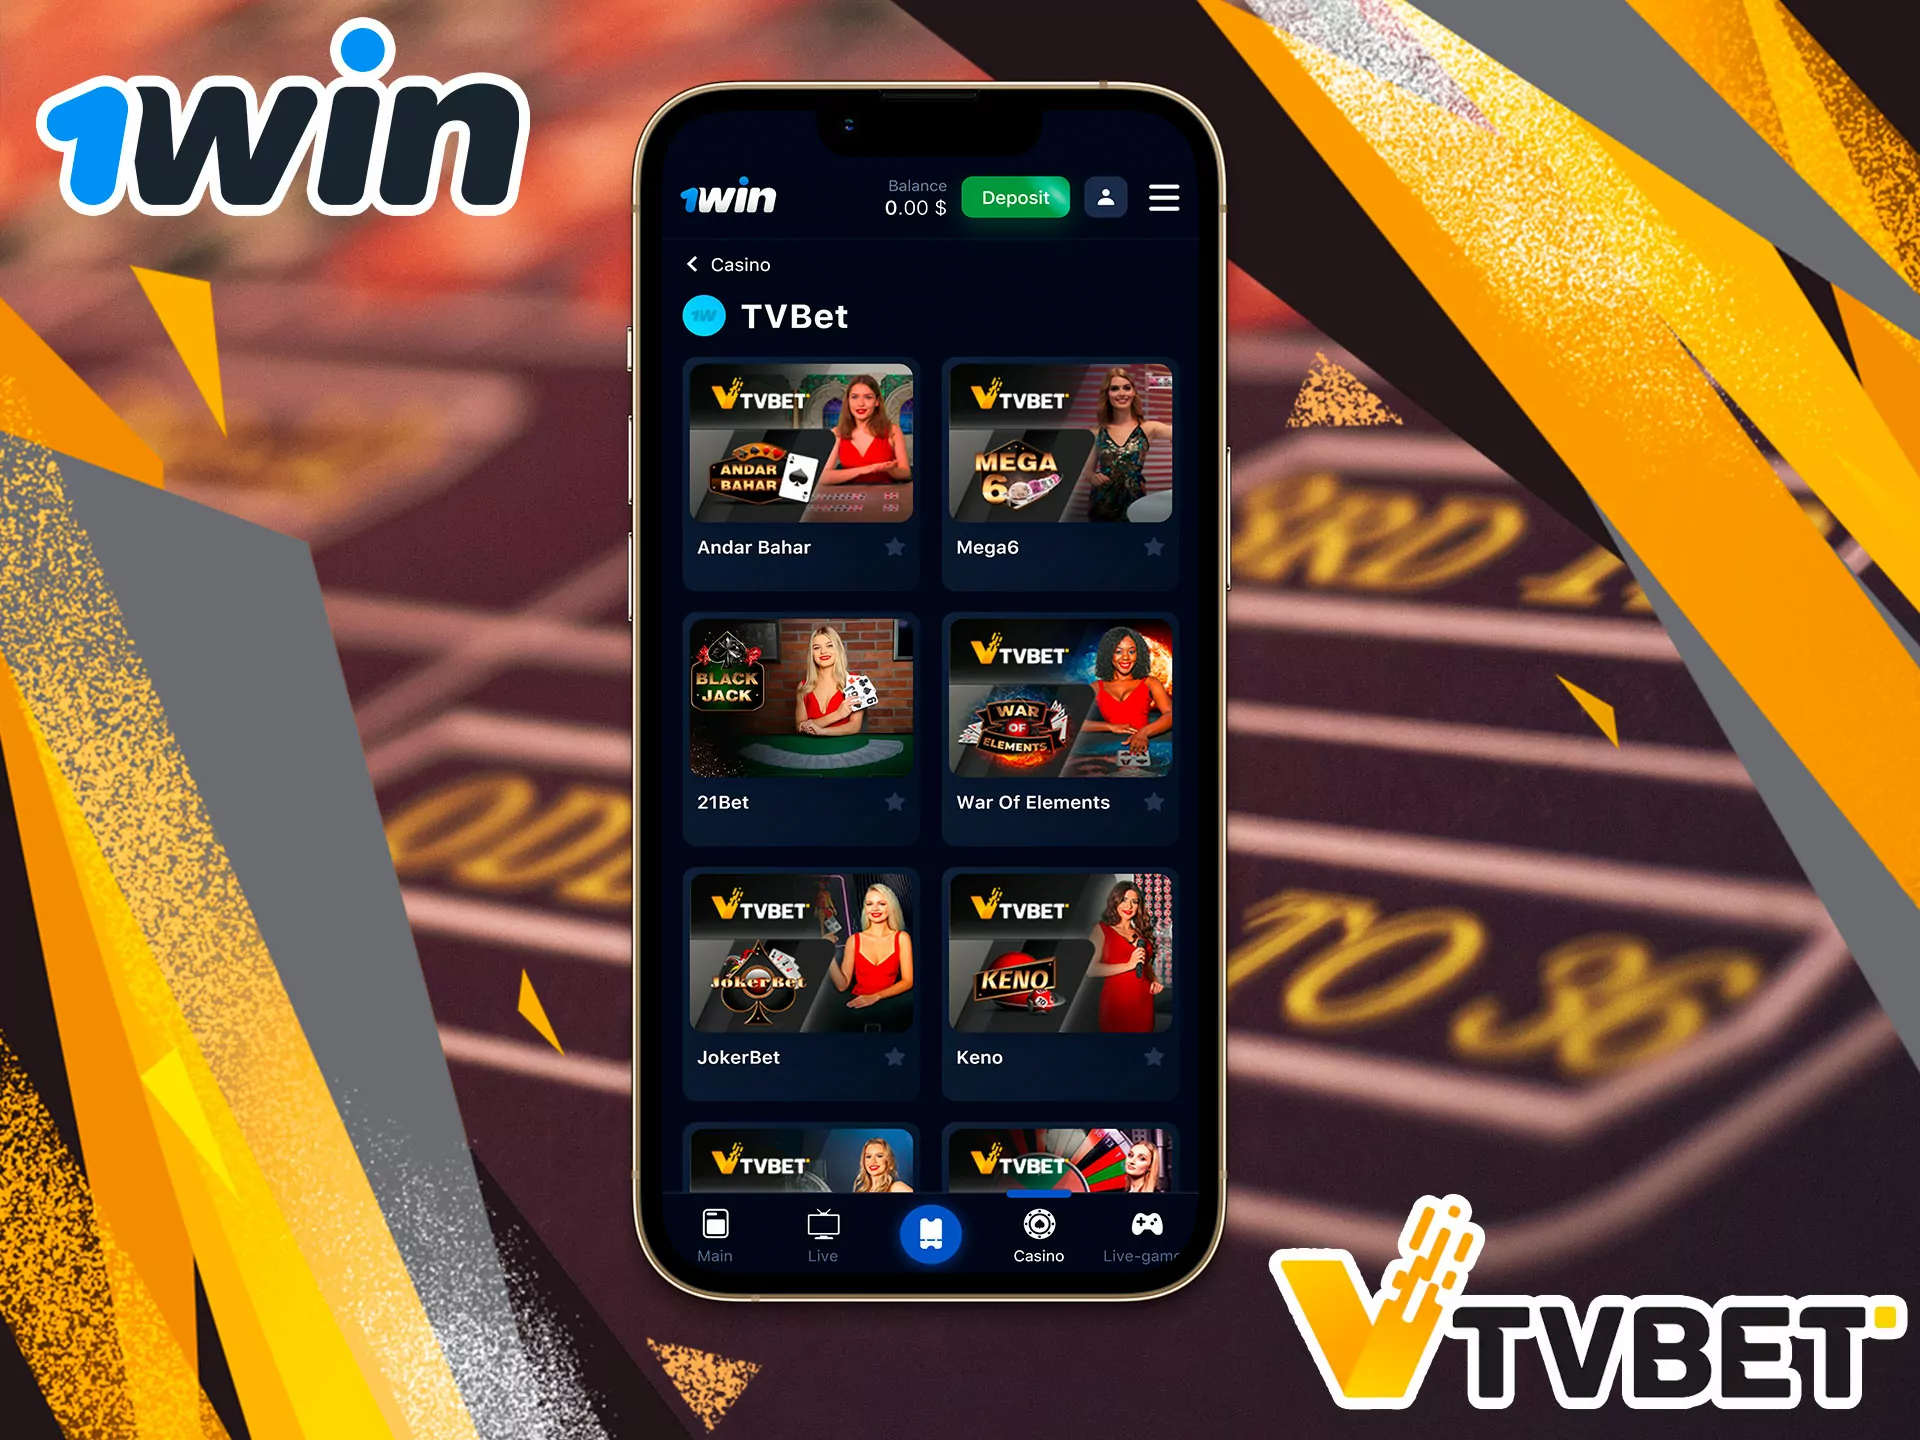 This section of the site is reminiscent of Betgames, it features a variety of games and is organized in such a way that you won't have any problems navigating it.